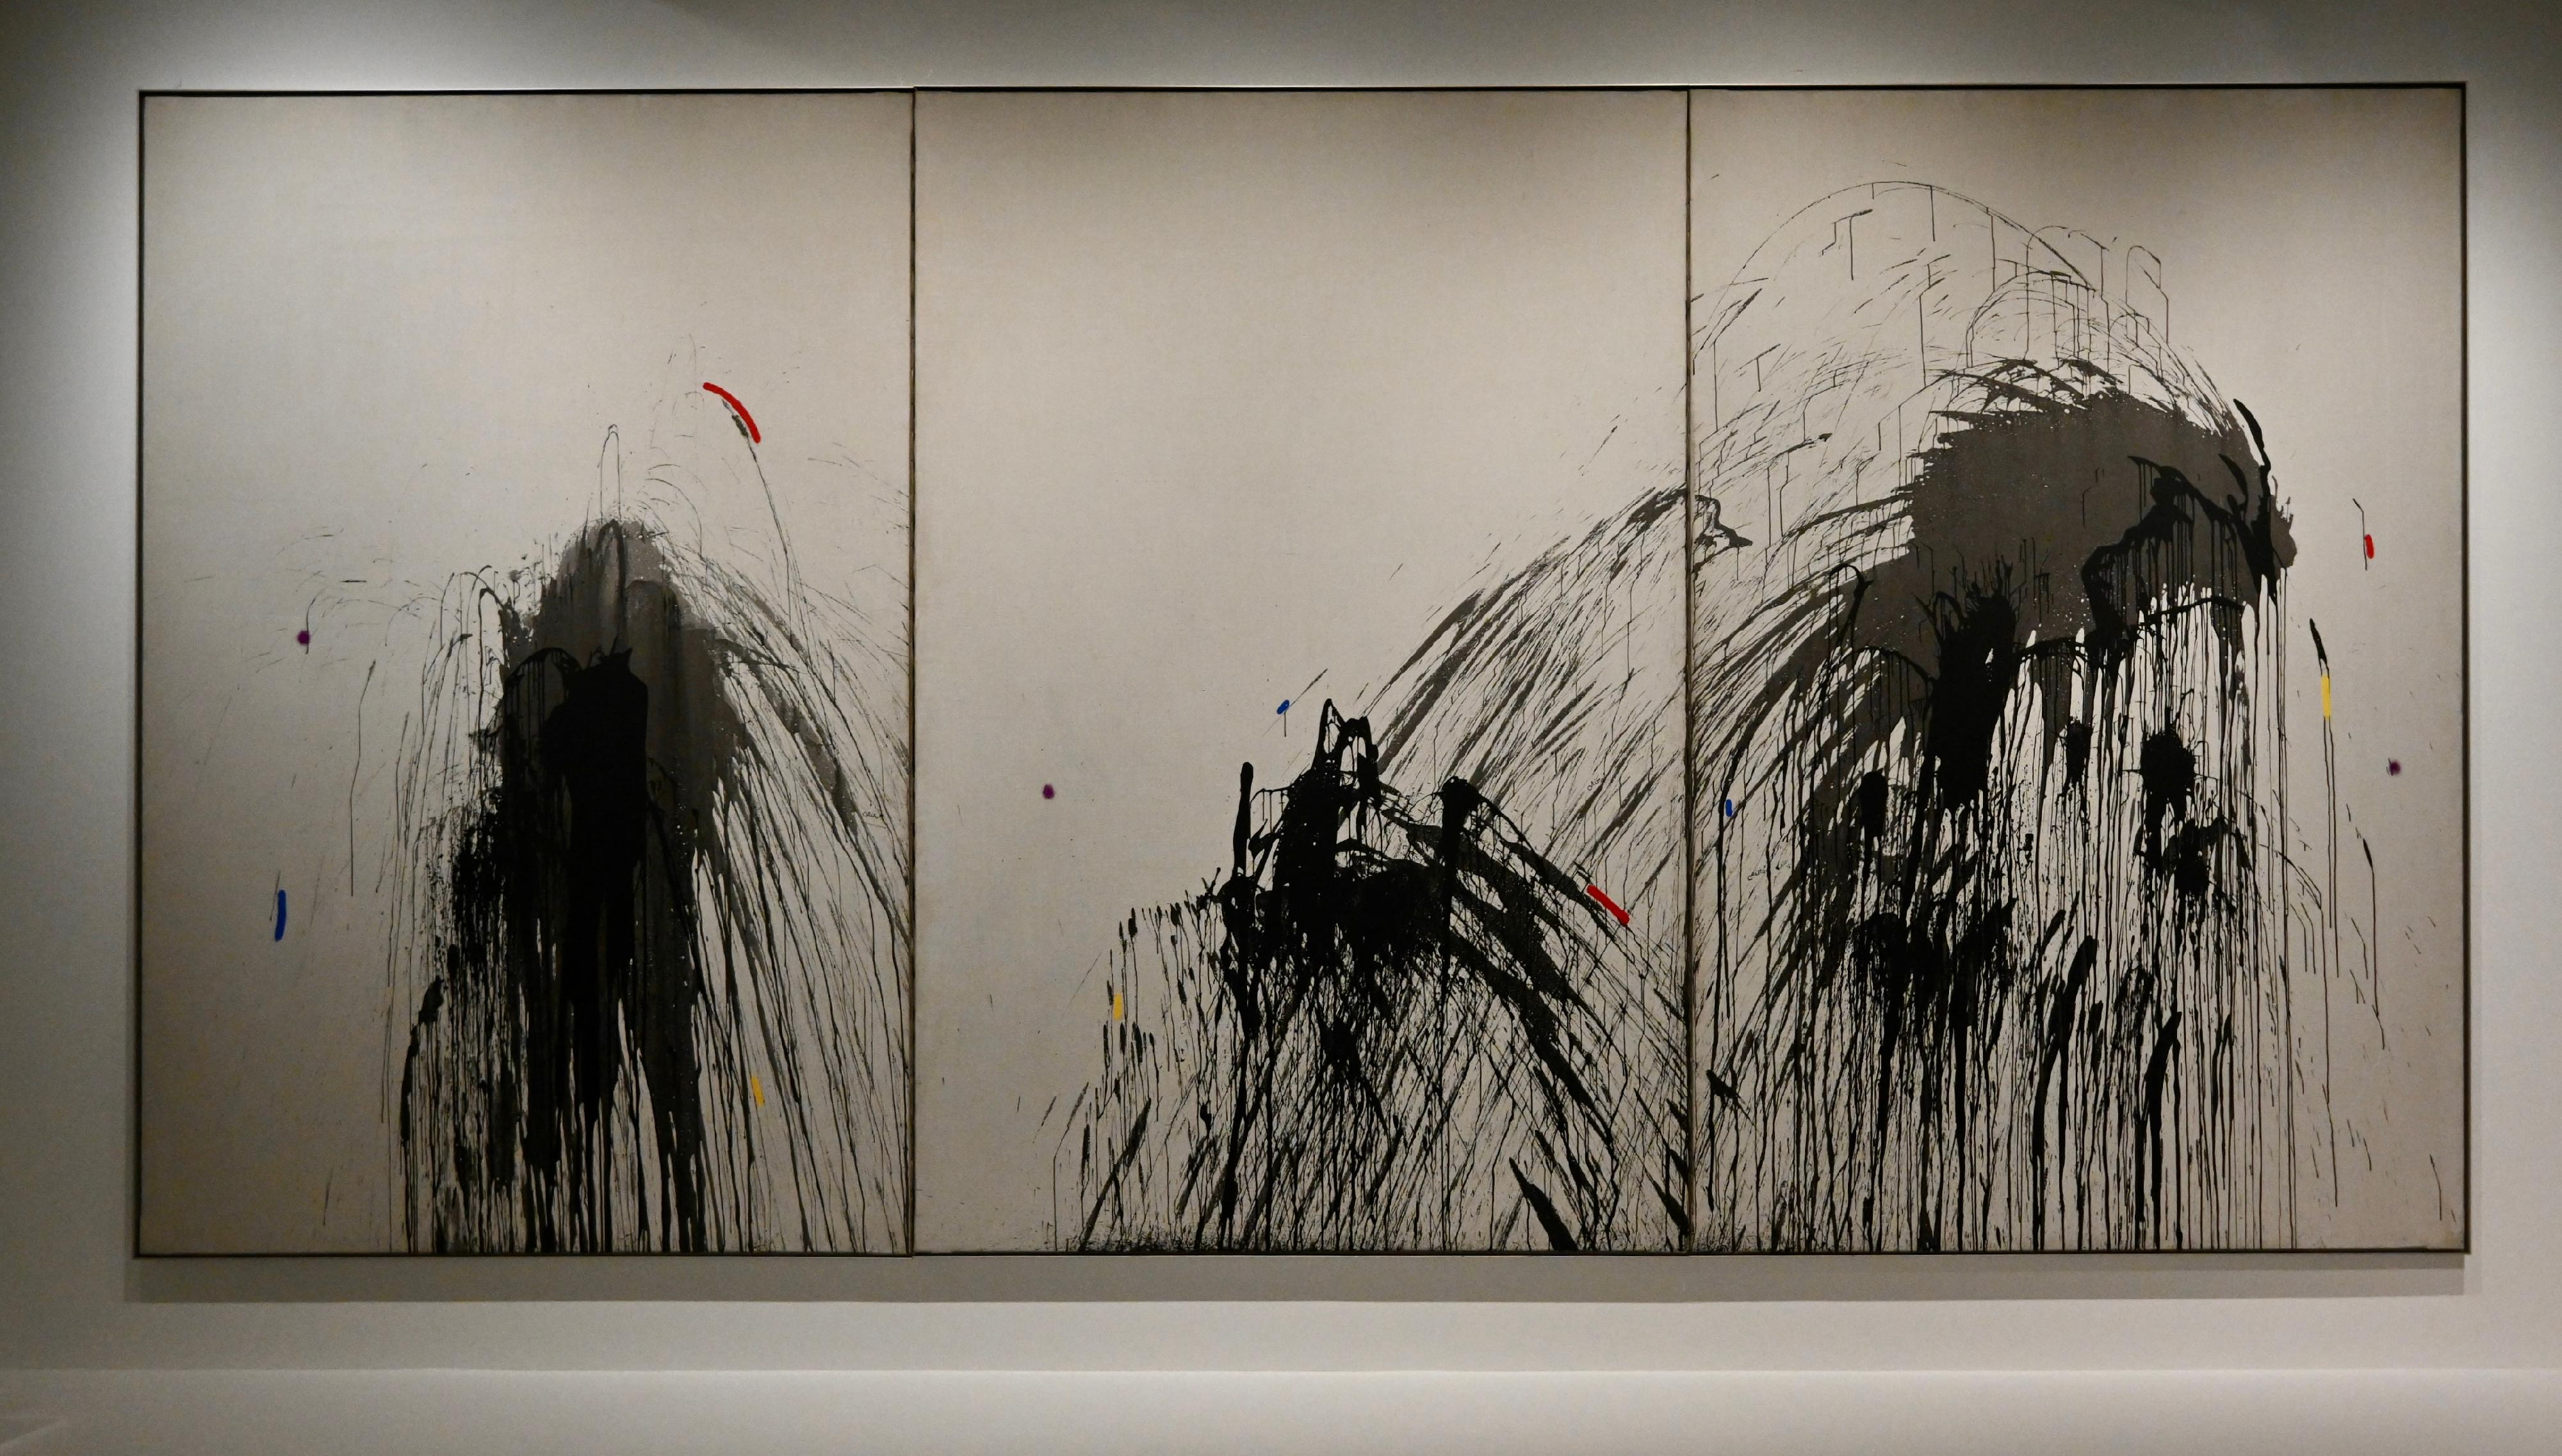 "The Hong Kong Jockey Club Series: Joan Miró — The Poetry of Everyday Life" exhibition will be held at the Hong Kong Museum of Art starting from tomorrow (March 3). Picture shows Miró's triptych, "Fireworks", which has rarely been seen outside the Fundació Joan Miró.